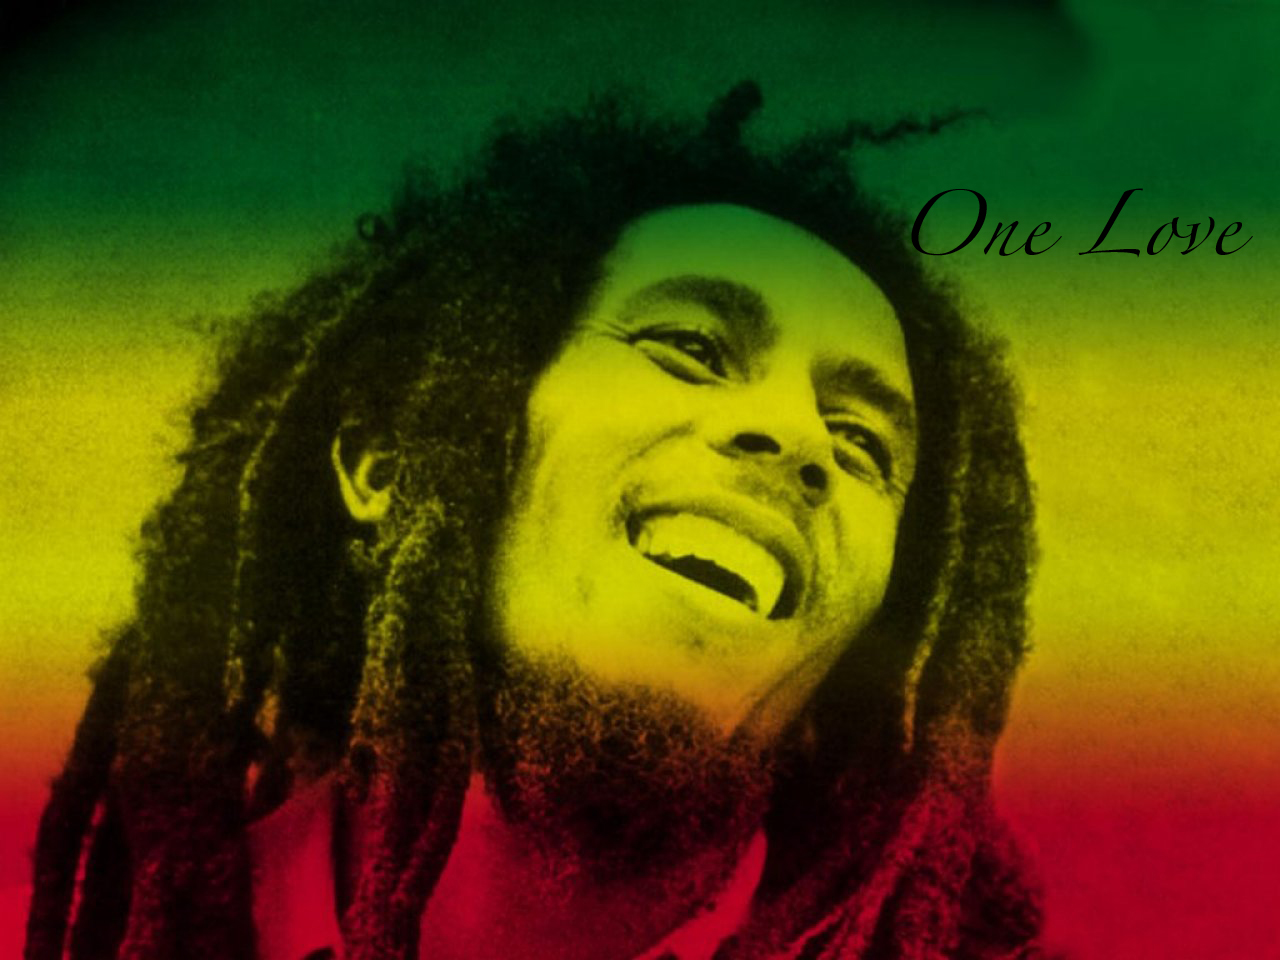 One Love Wallpaper Images amp Pictures Becuo